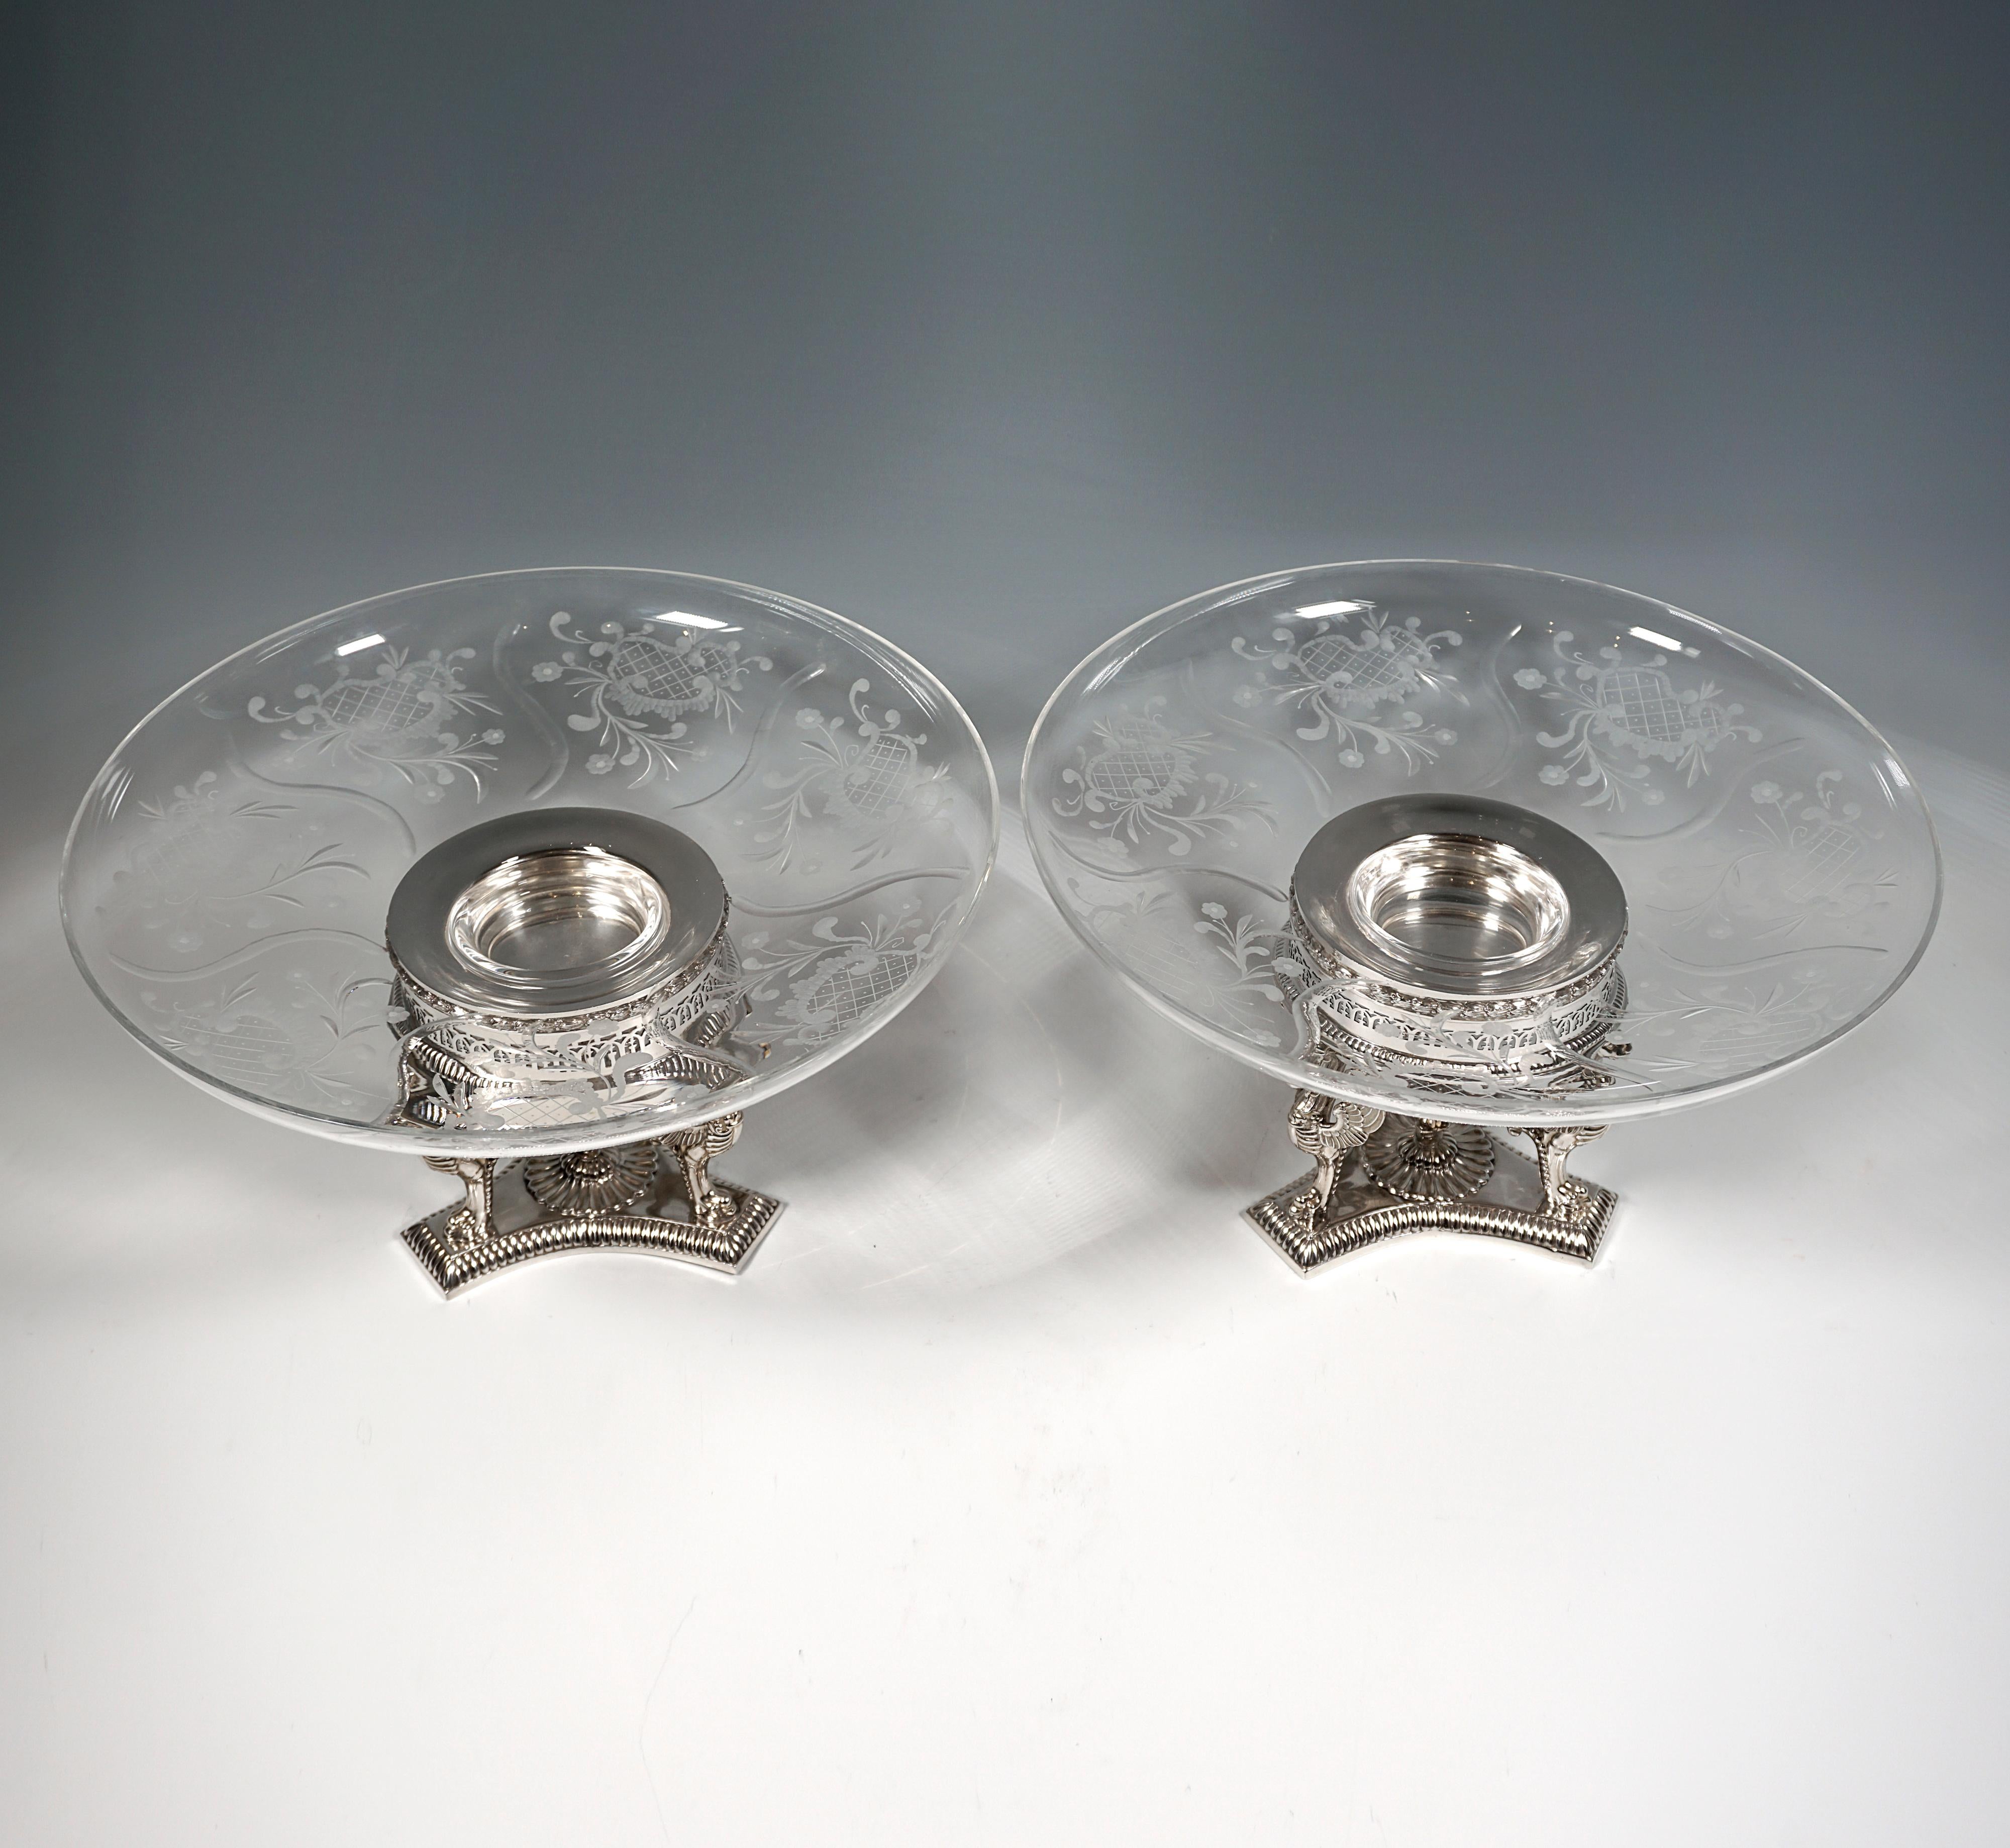 Two elegant silver centerpieces on a three-pass base with delicate embossed decoration and three winged lion figures supporting the richly ornamented and pierced insert for the projecting, artfully cut glass bowls.

Total dimensions piece:
height:  